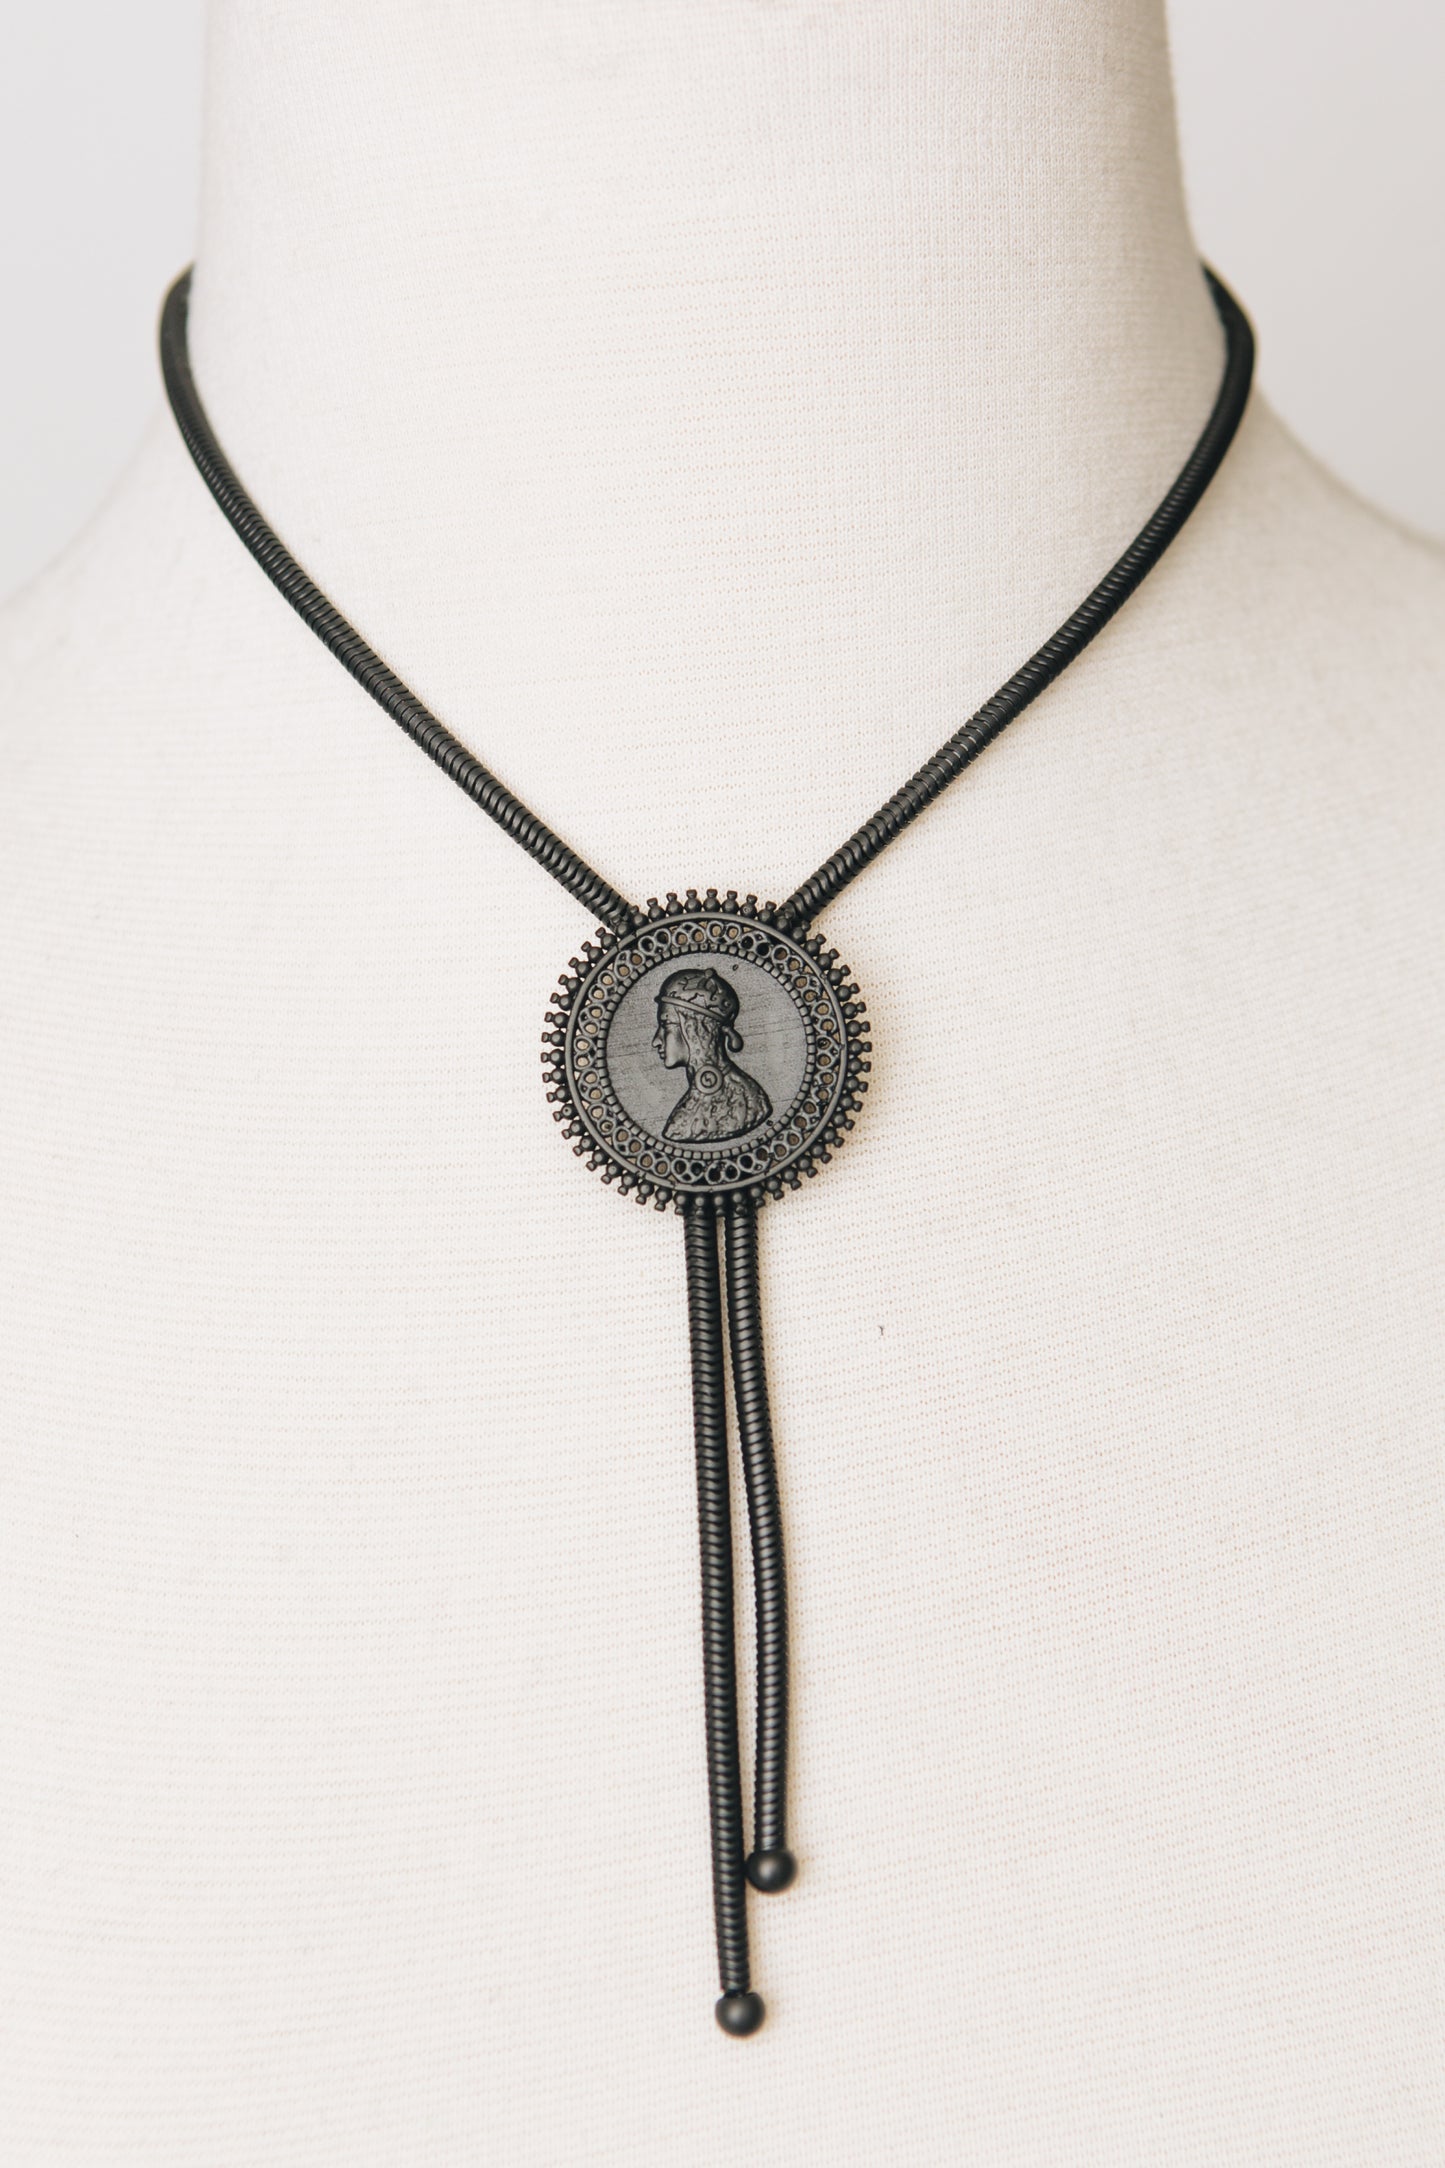 Oak & Ivy - Waterproof Mesh Chain With Coin Pendant